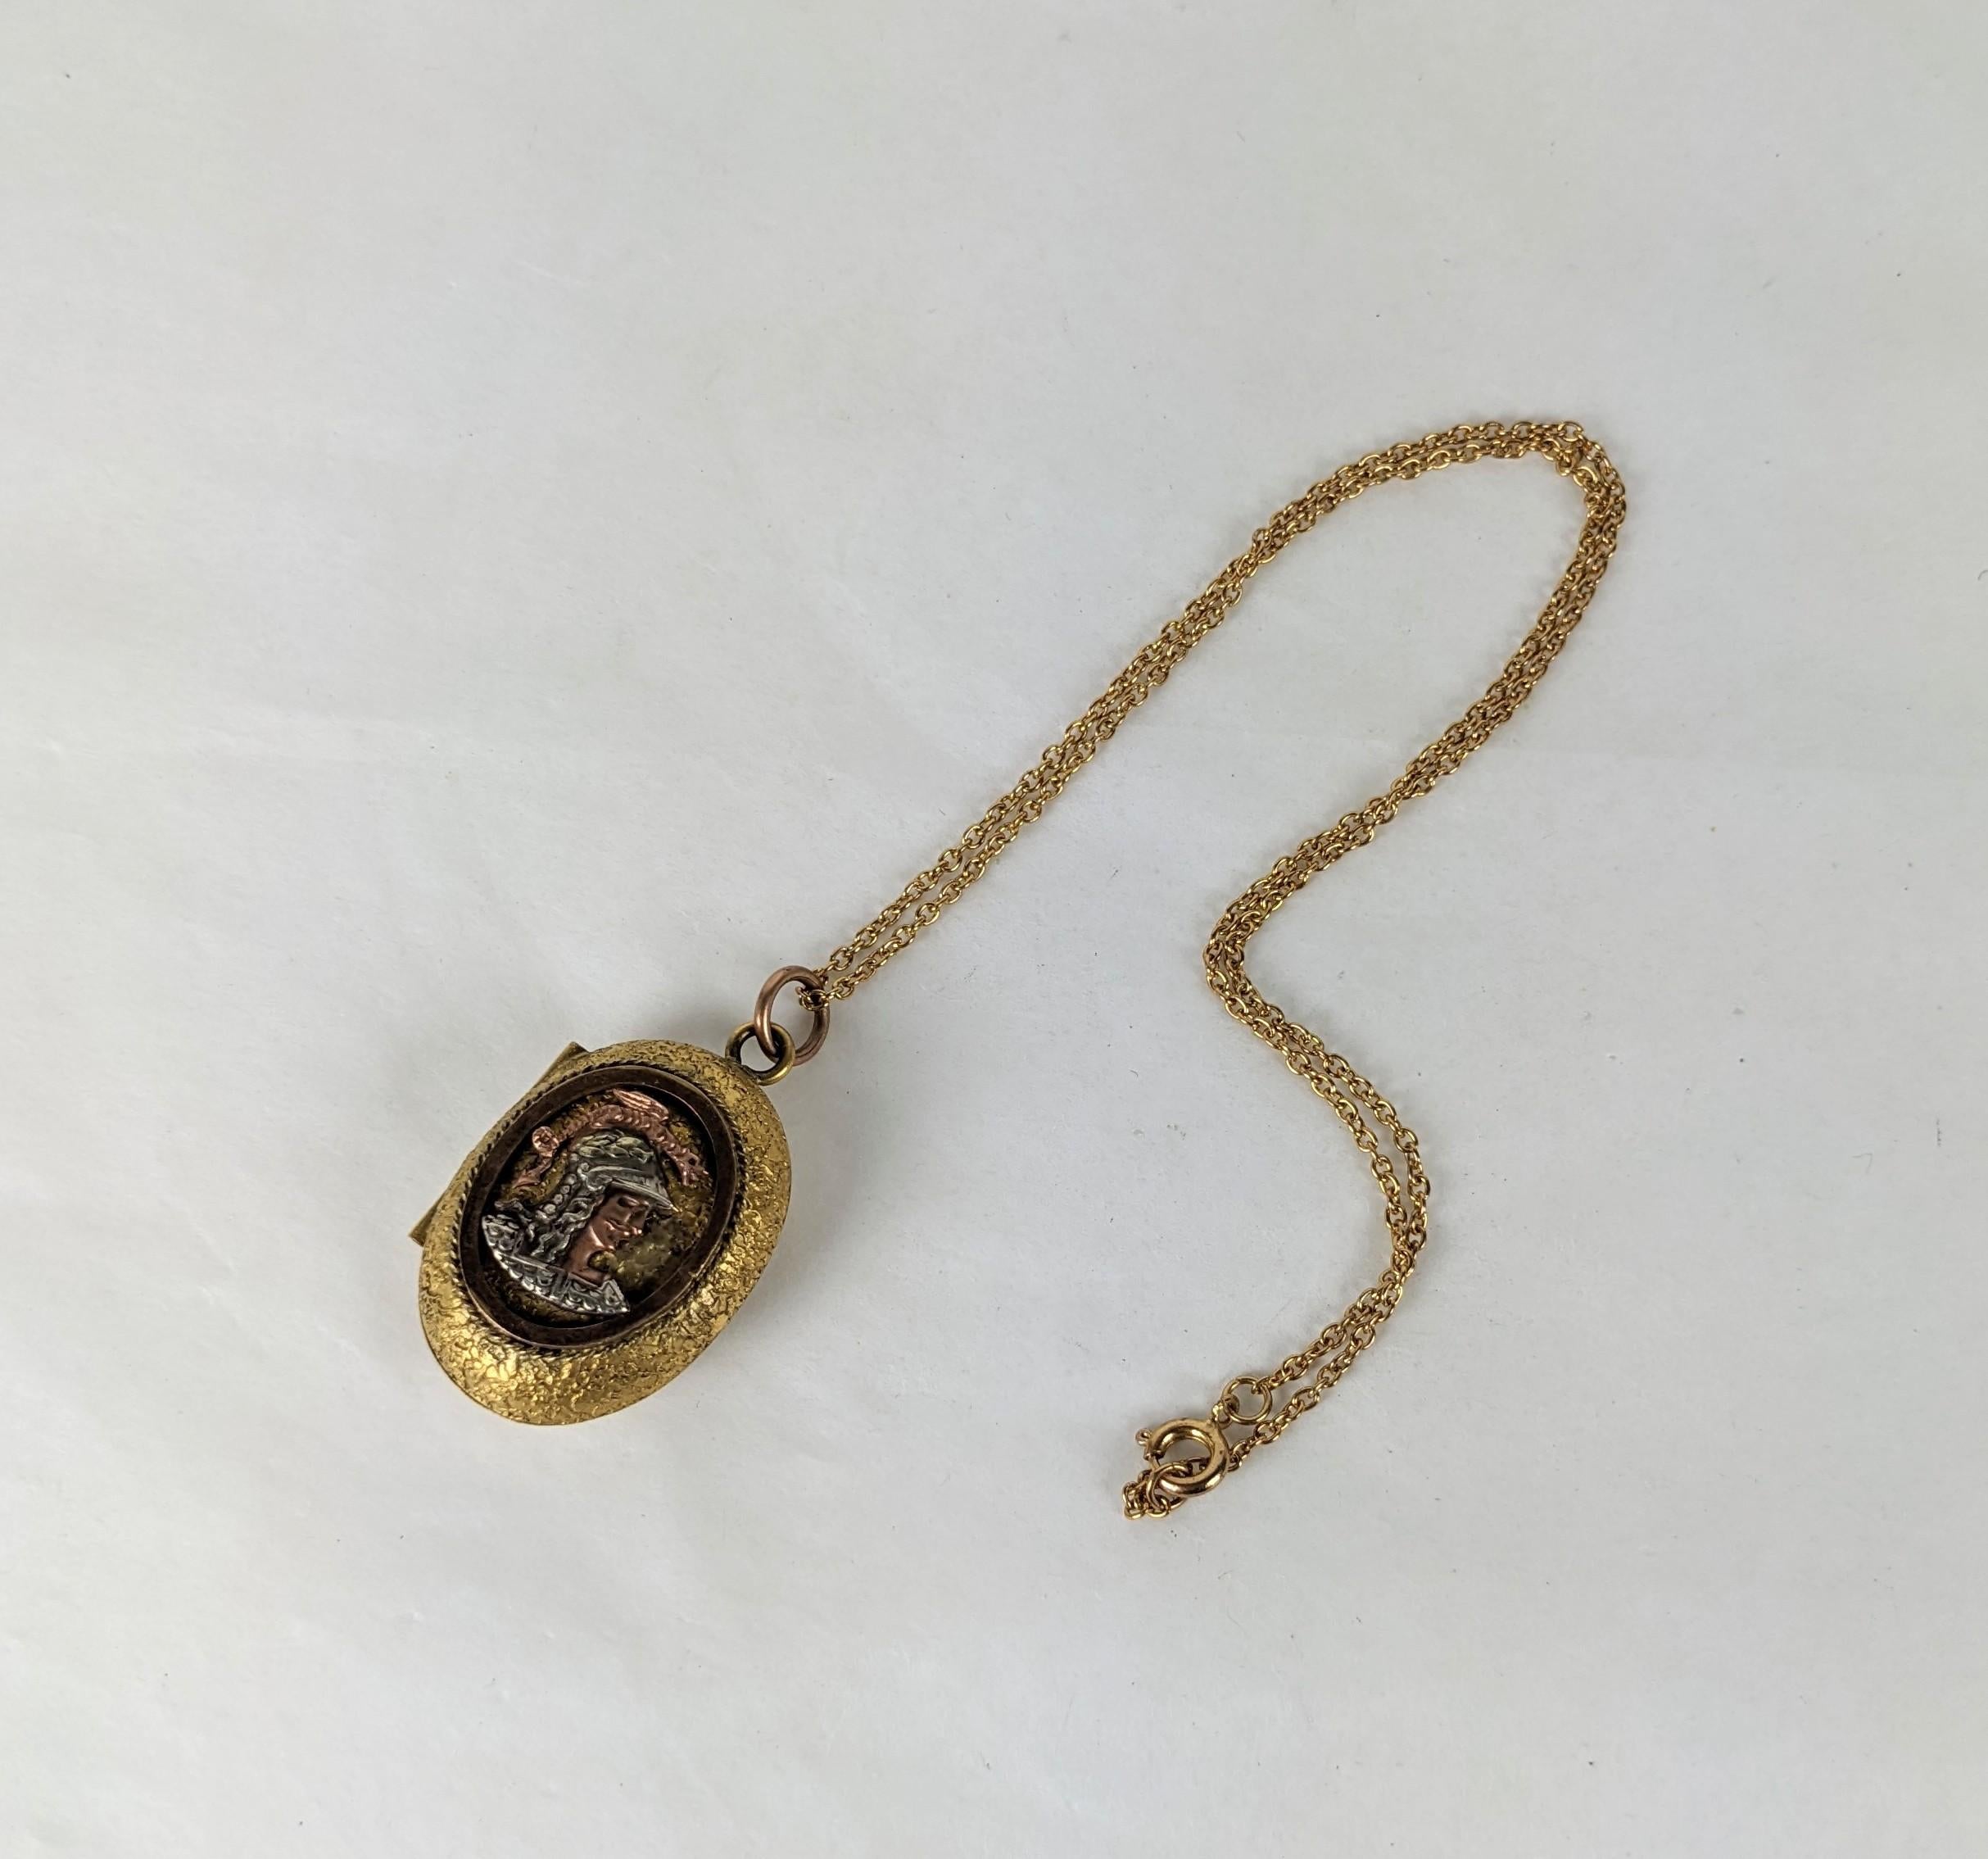 Unusual Tricolor Victorian Locket of a warrior rendered in 3 tones of gold on a gold filled base. A warrior is depicted in profile on the front with a hammered gold back. Glass interior intact, but chain is not original. 1 3/8